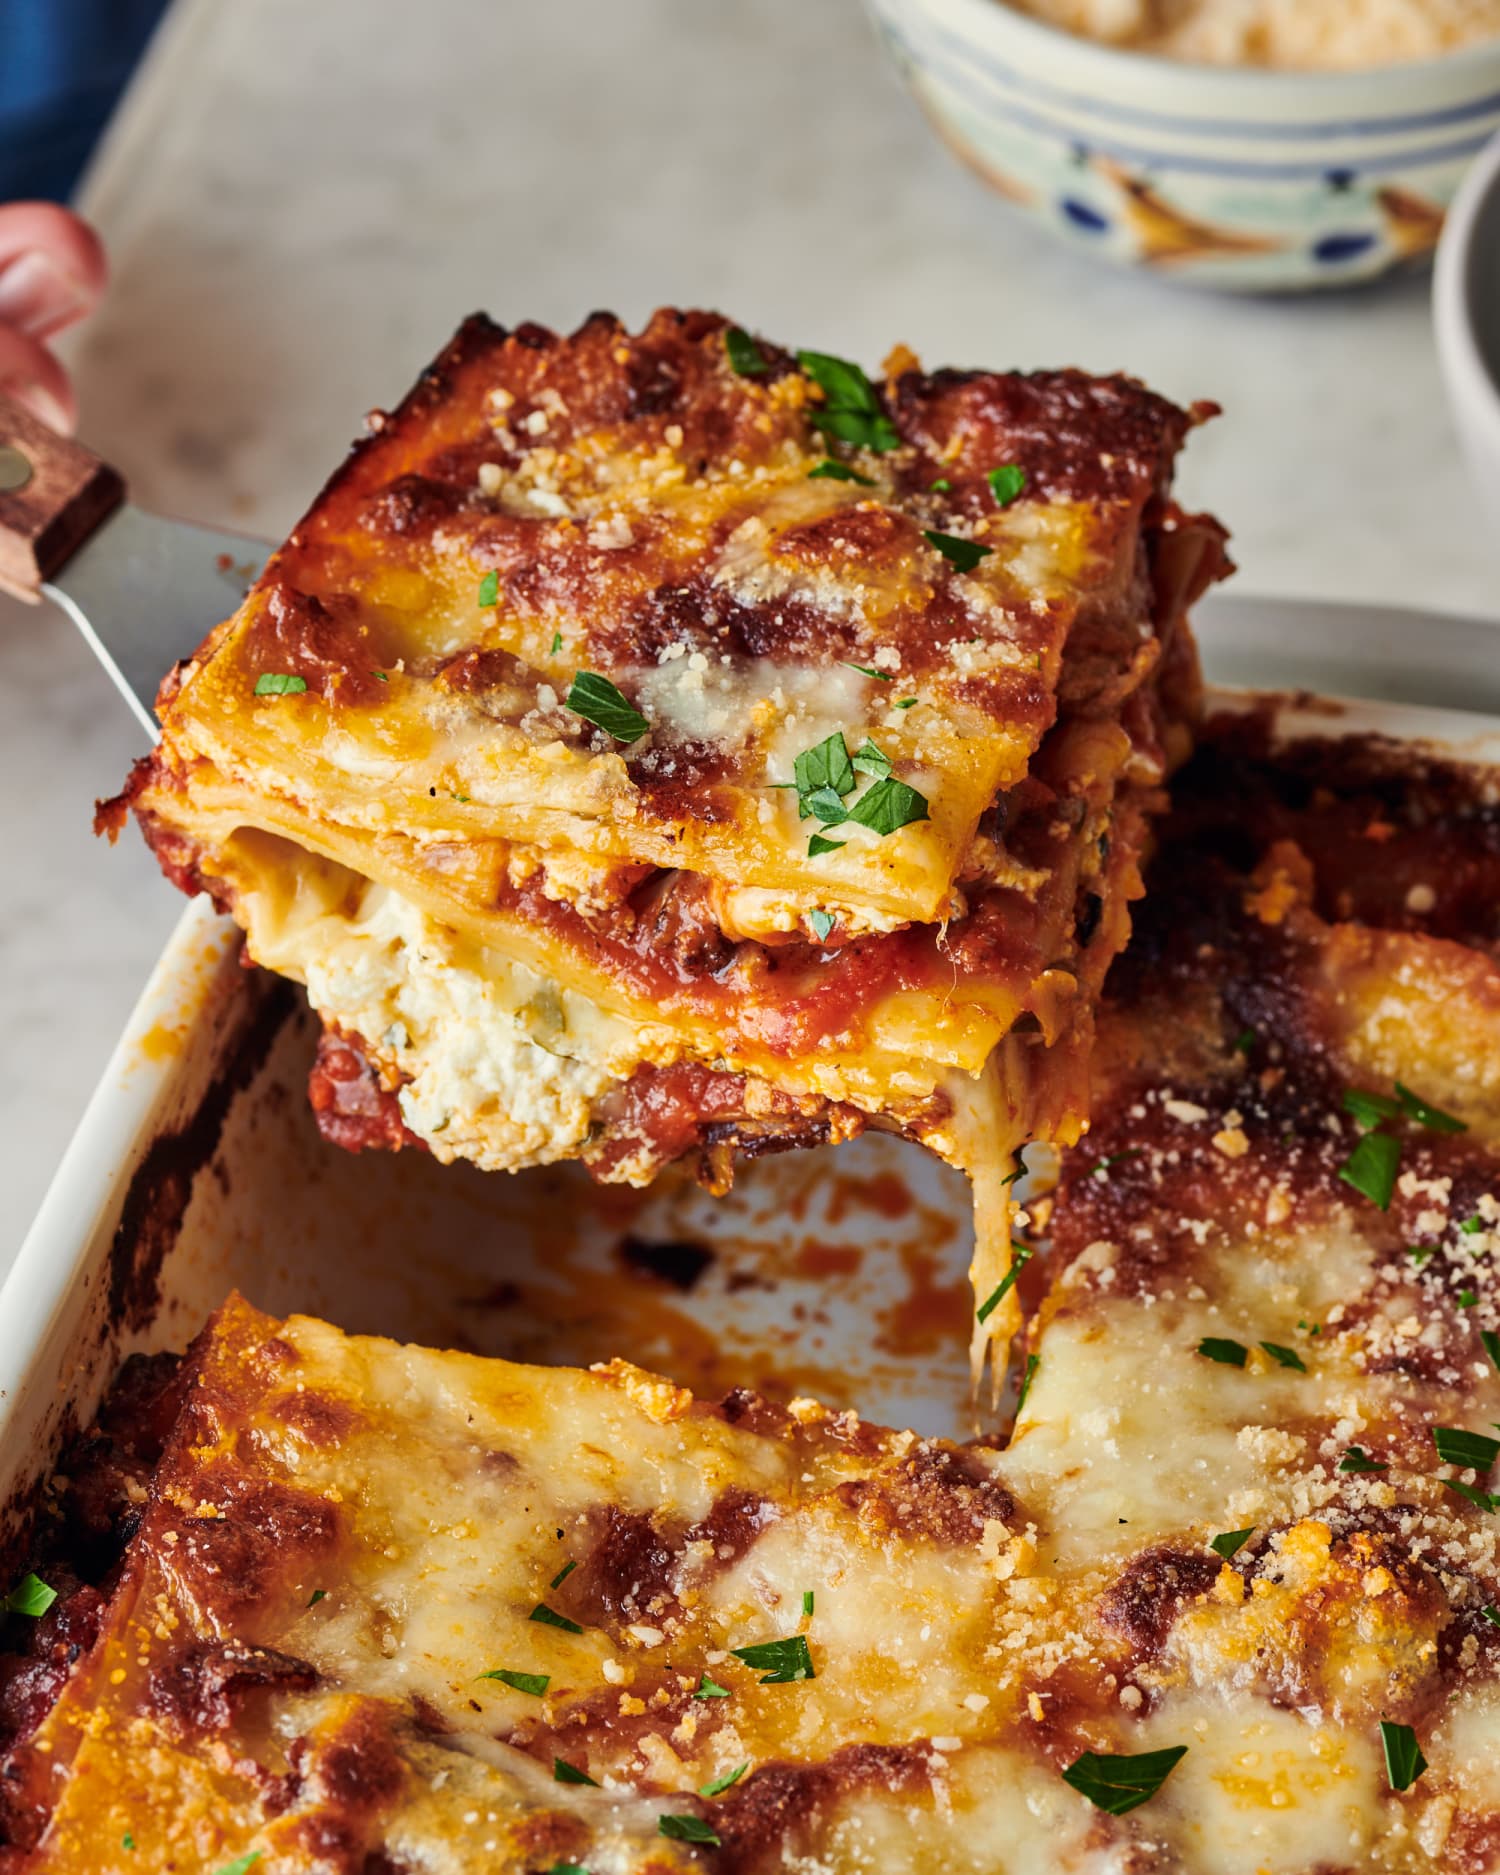 Ina Garten’s Clever Lasagna Noodle Hack Will Forever Change the Way You Make Lasagna